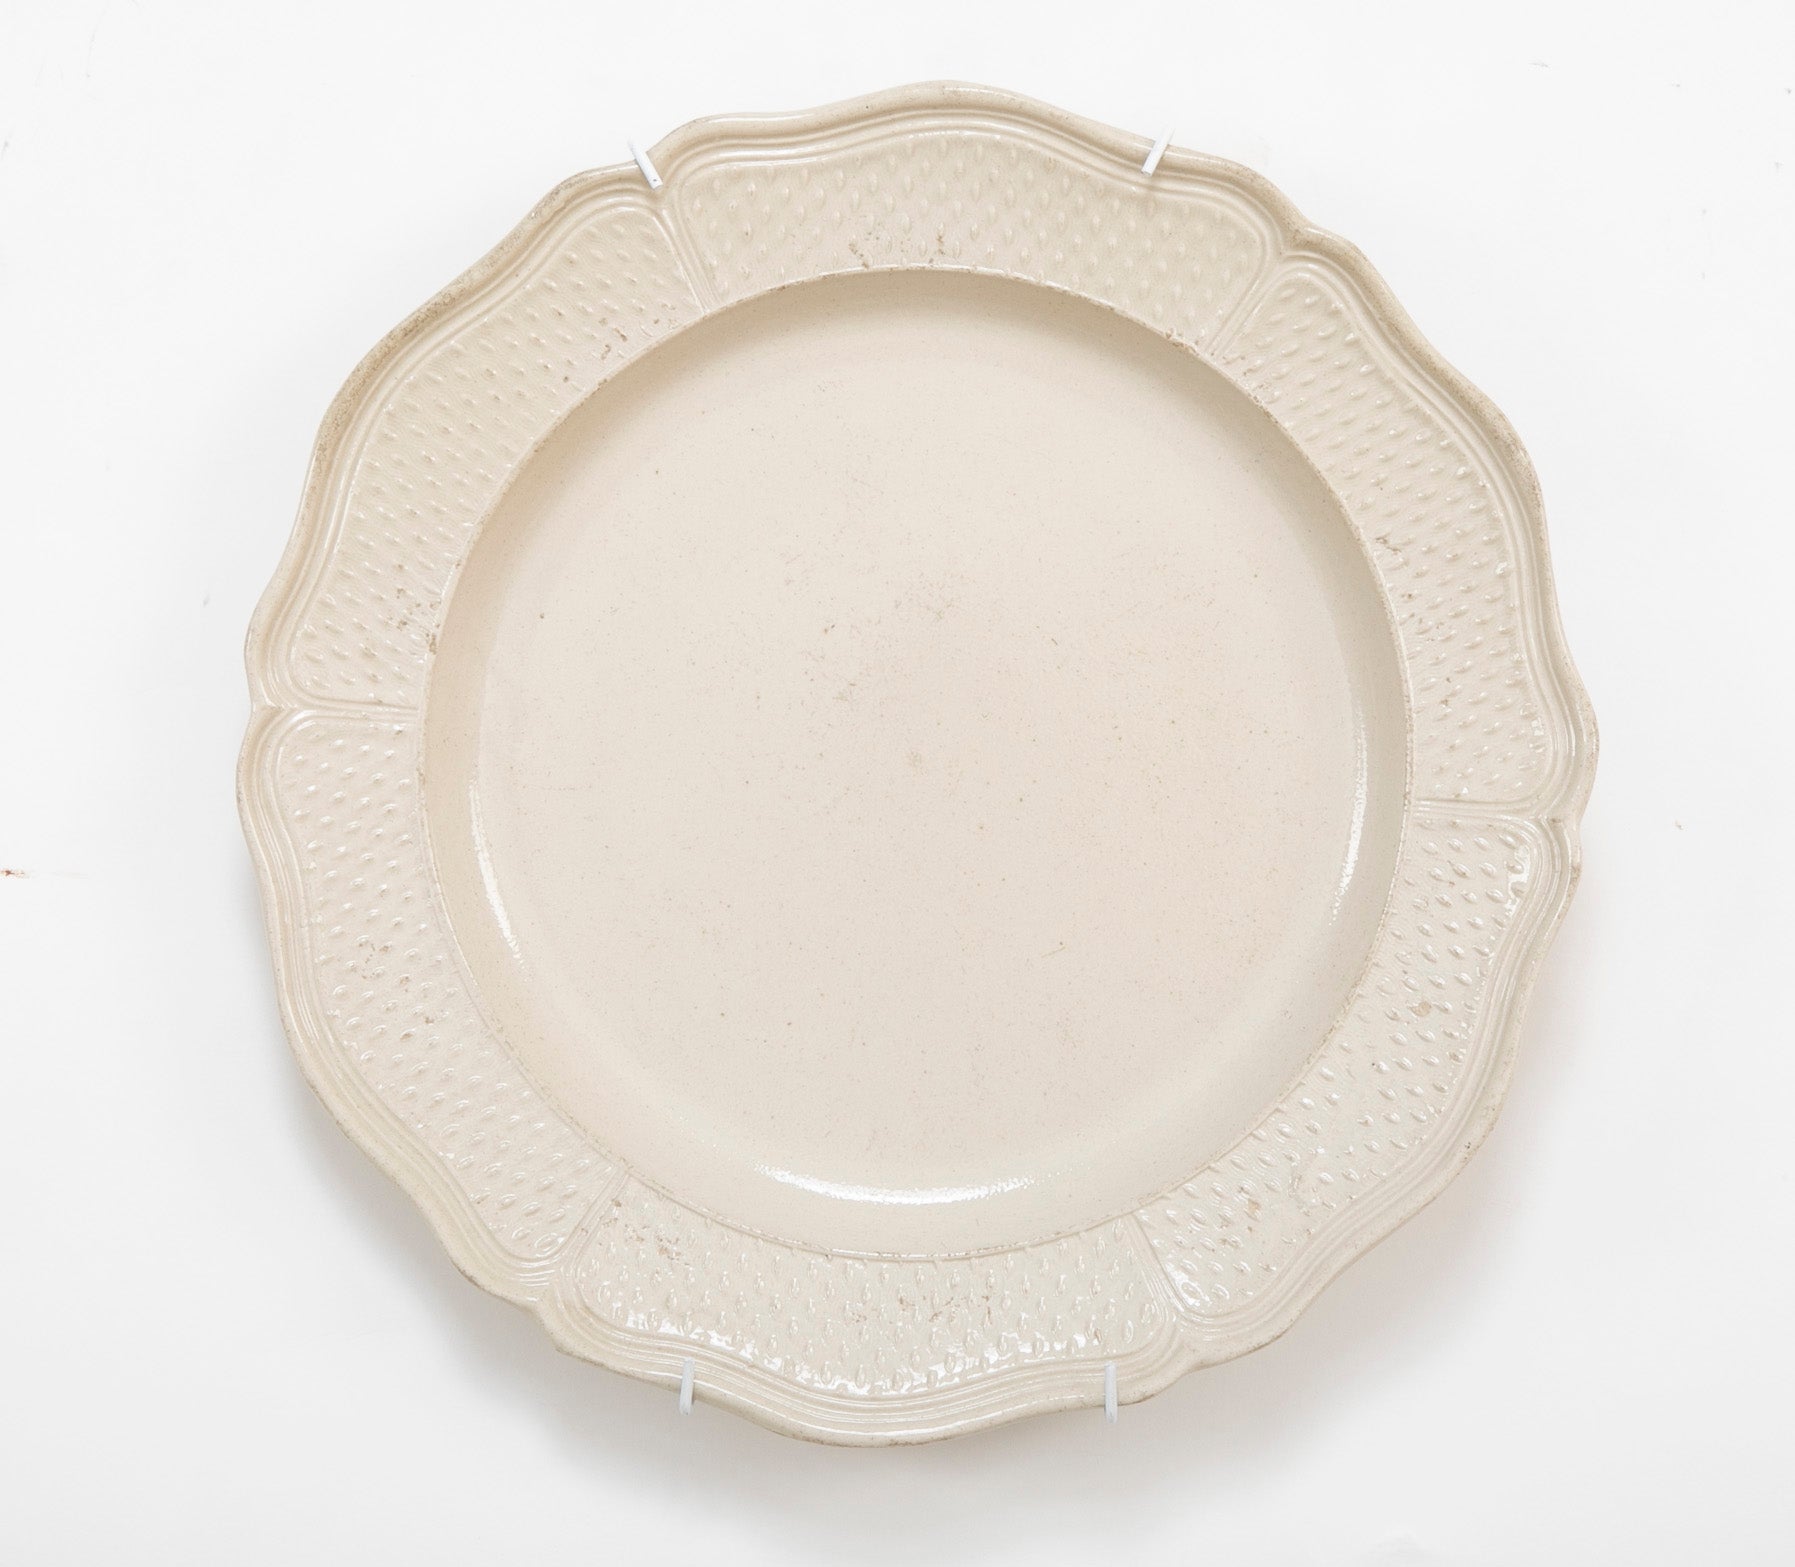 A Salt Glazed Stoneware Charger with Serpentine Border and Dimpled Margin